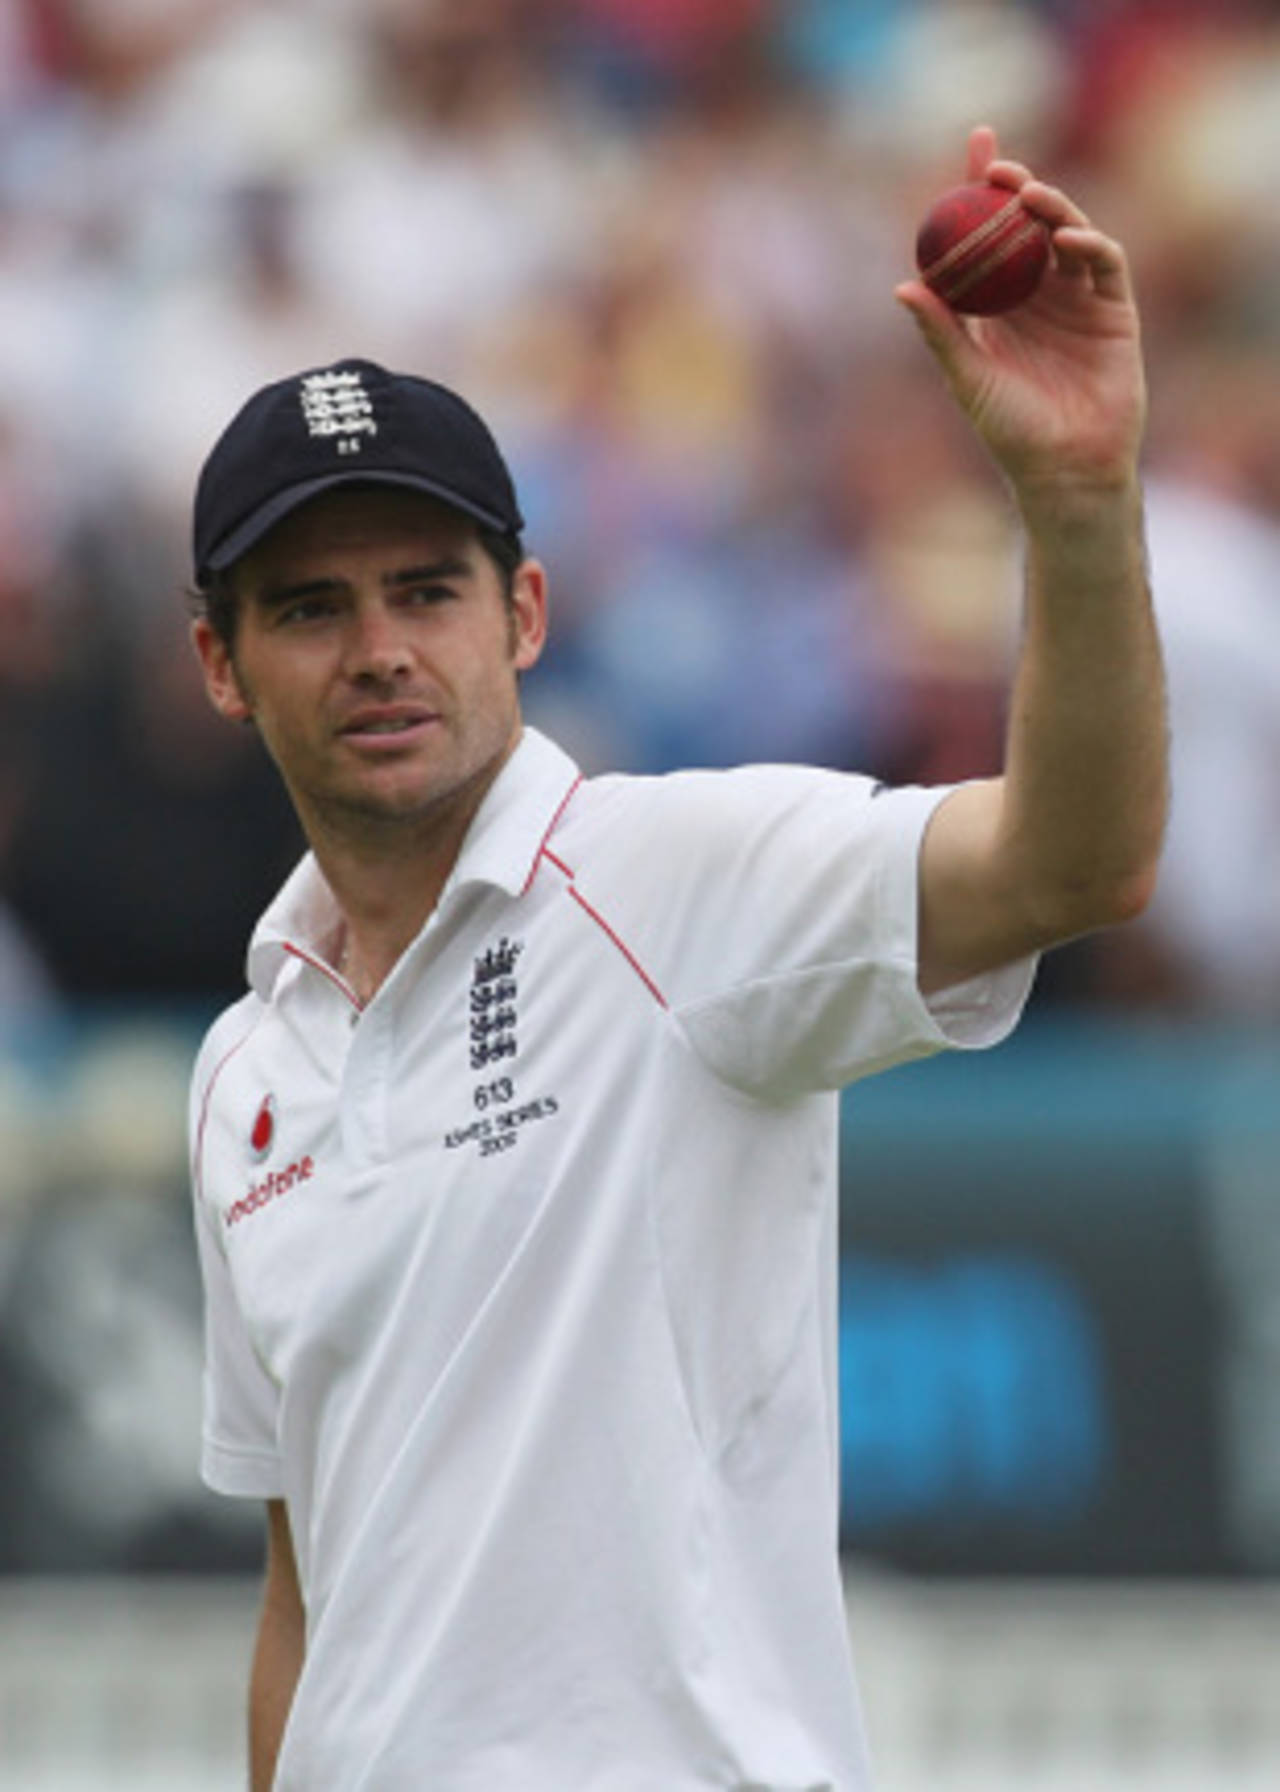 James Anderson acknowledges his five-wicket haul, England v Australia, 3rd Test, Edgbaston, 2nd day, July 31, 2009